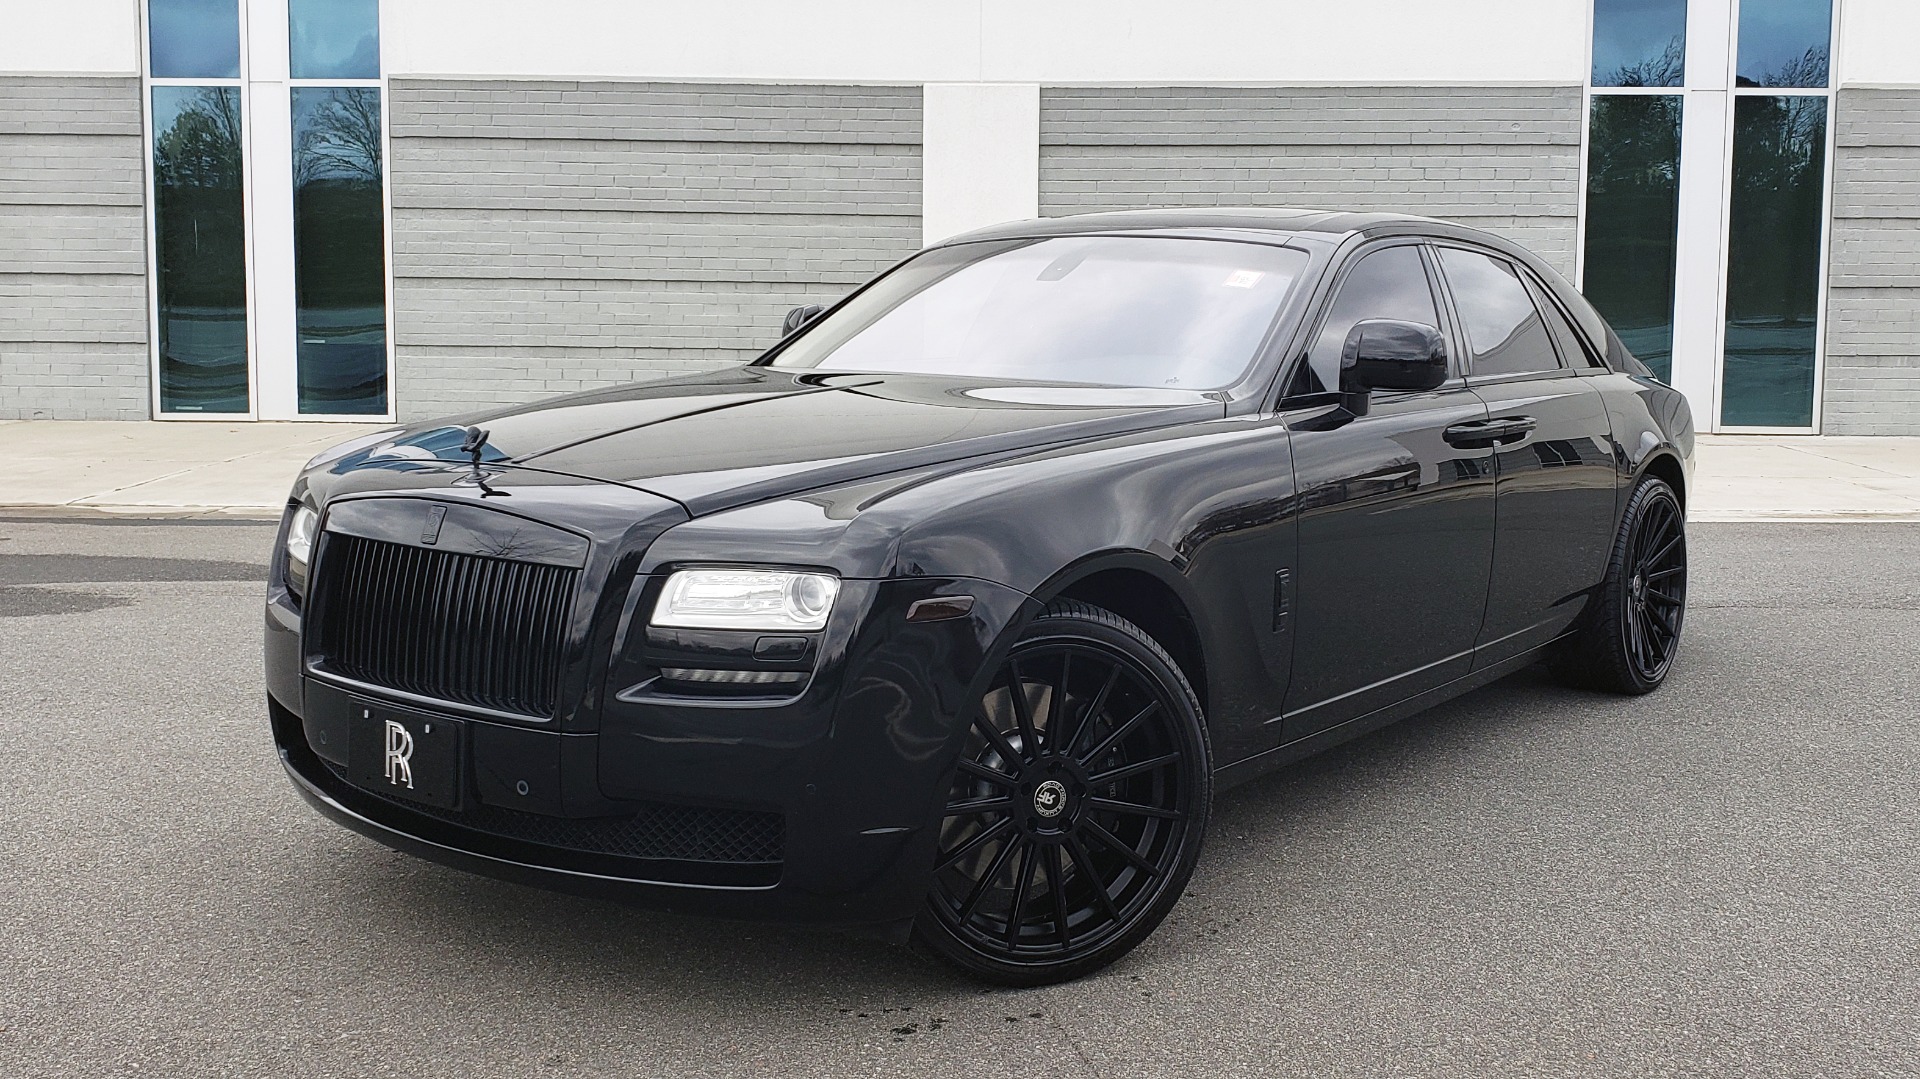 Used 2010 Rolls-Royce GHOST 6.6L TURBO V12 (563HP) / NAV / SUNROOF /  SUICIDE DOORS For Sale ($89,000) | Formula Imports Stock #FC10986